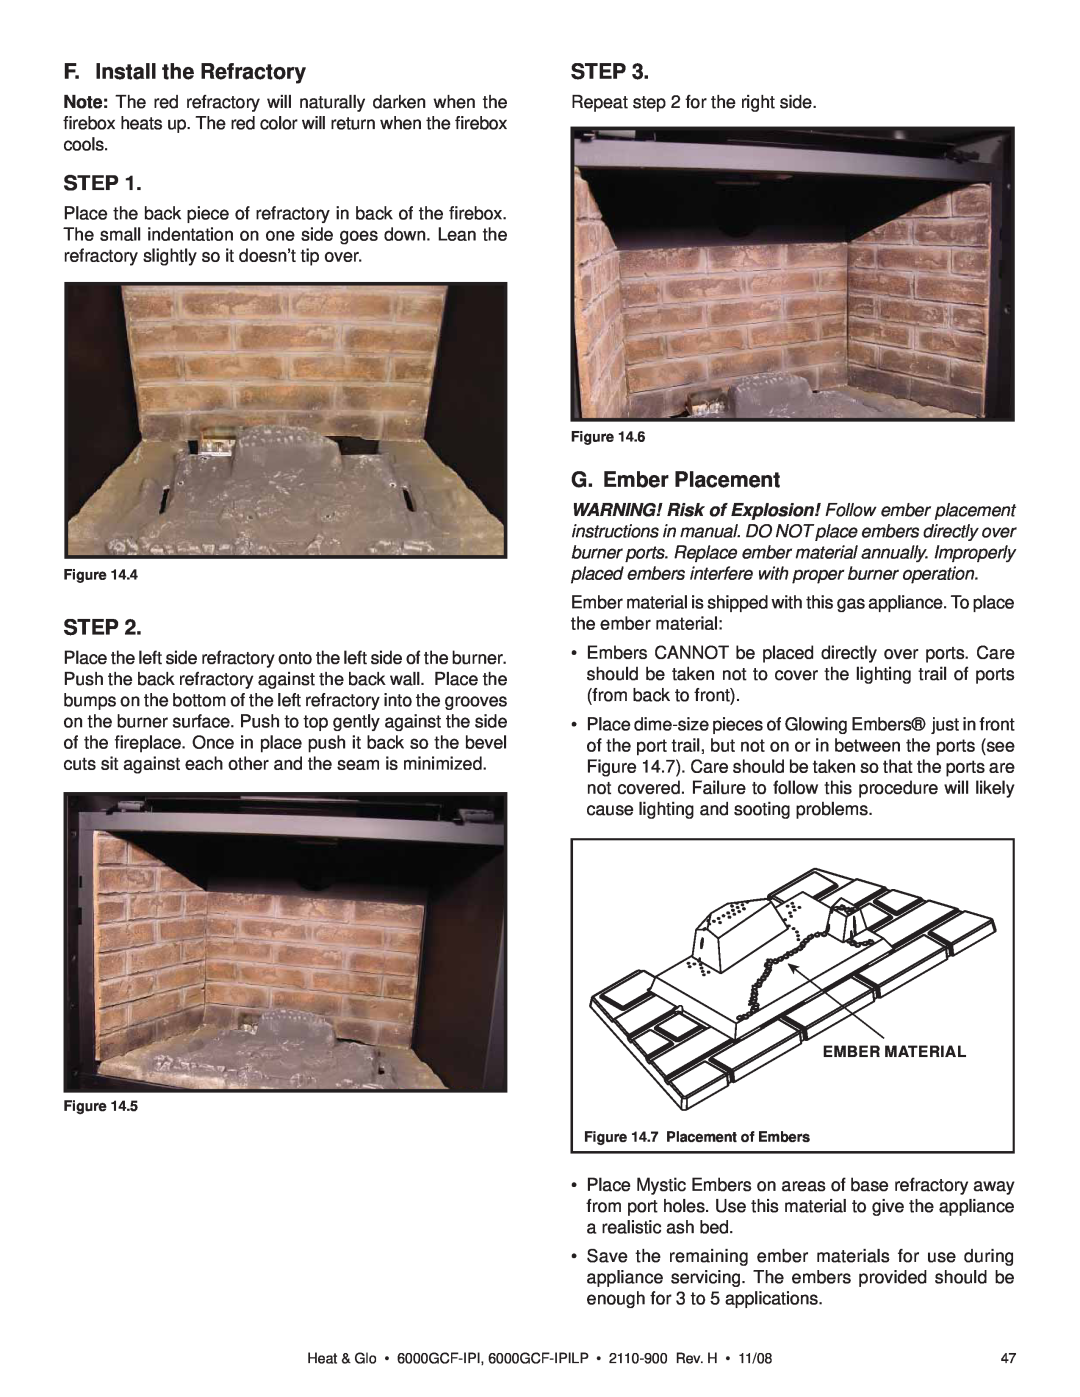 Hearth and Home Technologies 6000GCF-IPIL owner manual F. Install the Refractory, Step, G. Ember Placement 